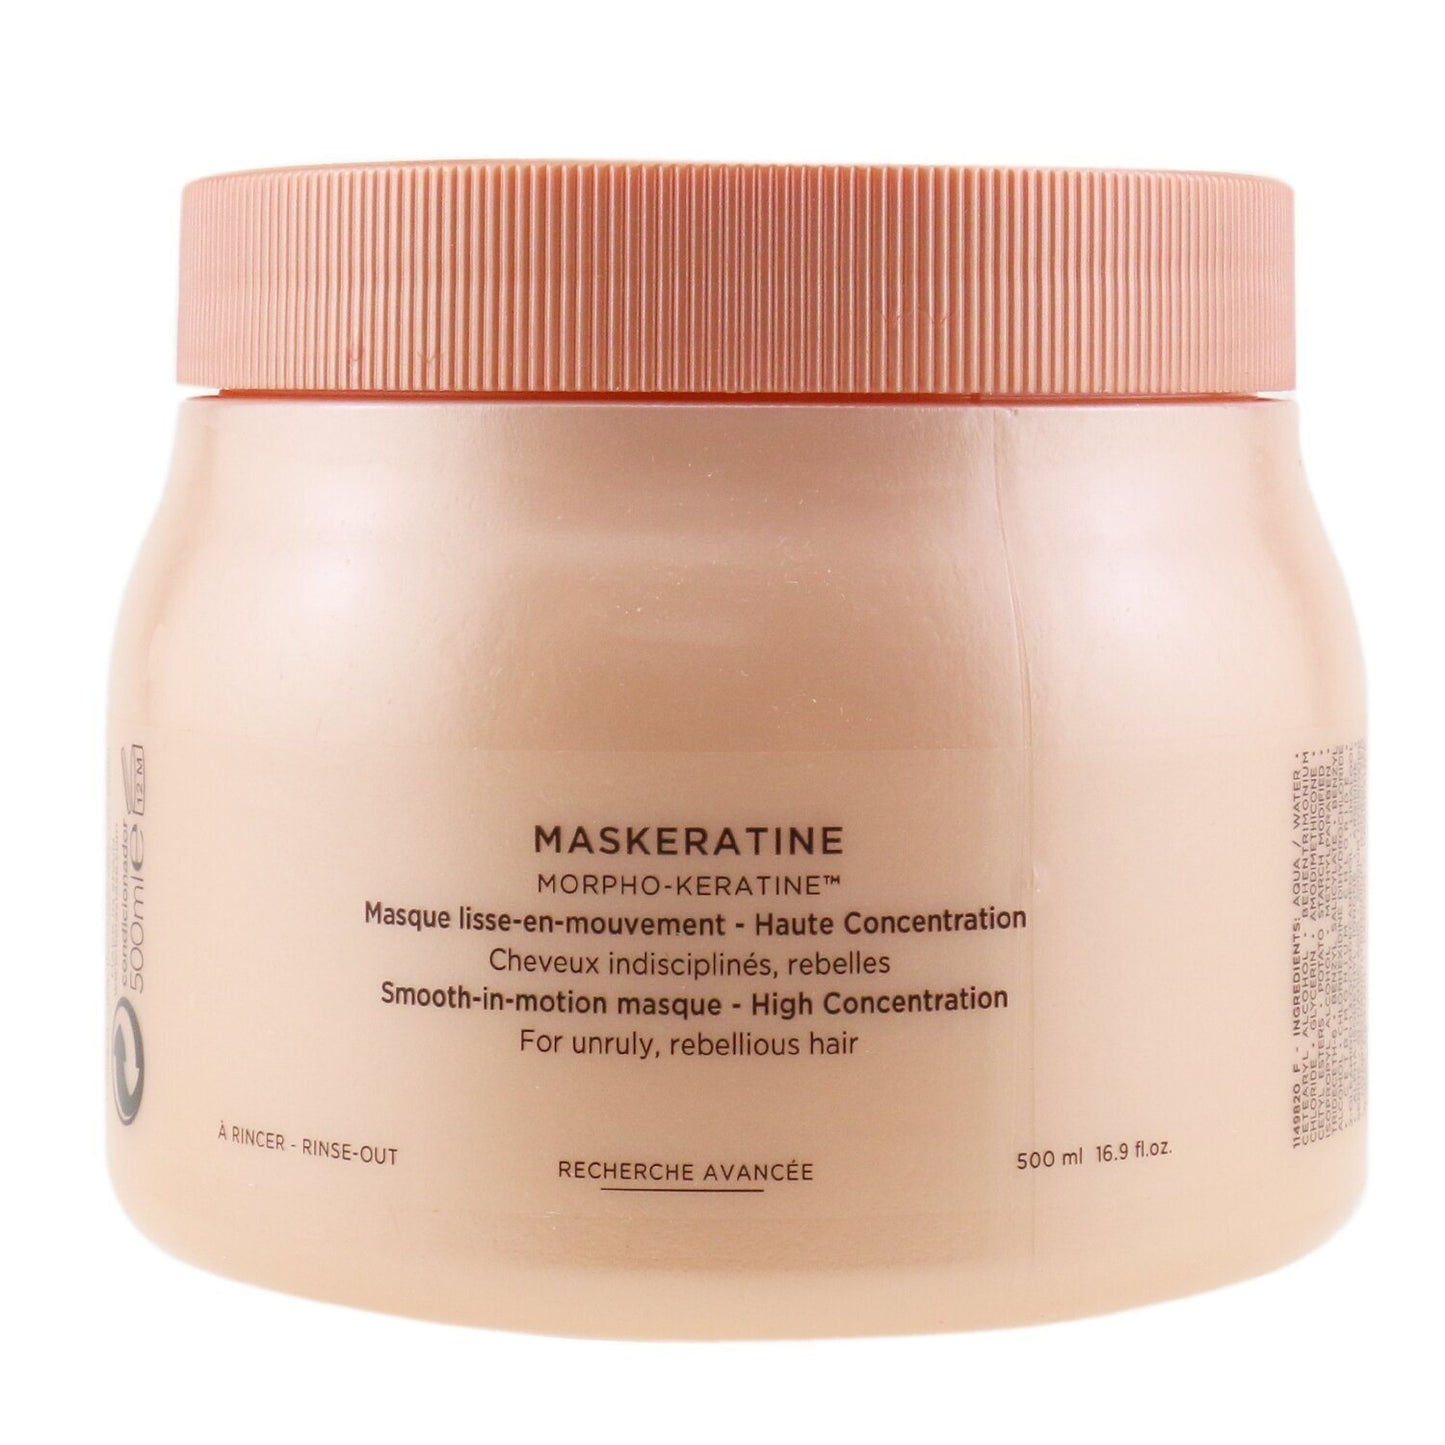 KERASTASE - Discipline Maskeratine Smooth-in-Motion Masque - High Concentration (For Unruly, Rebellious Hair)   E1043200 500ml/16.9oz